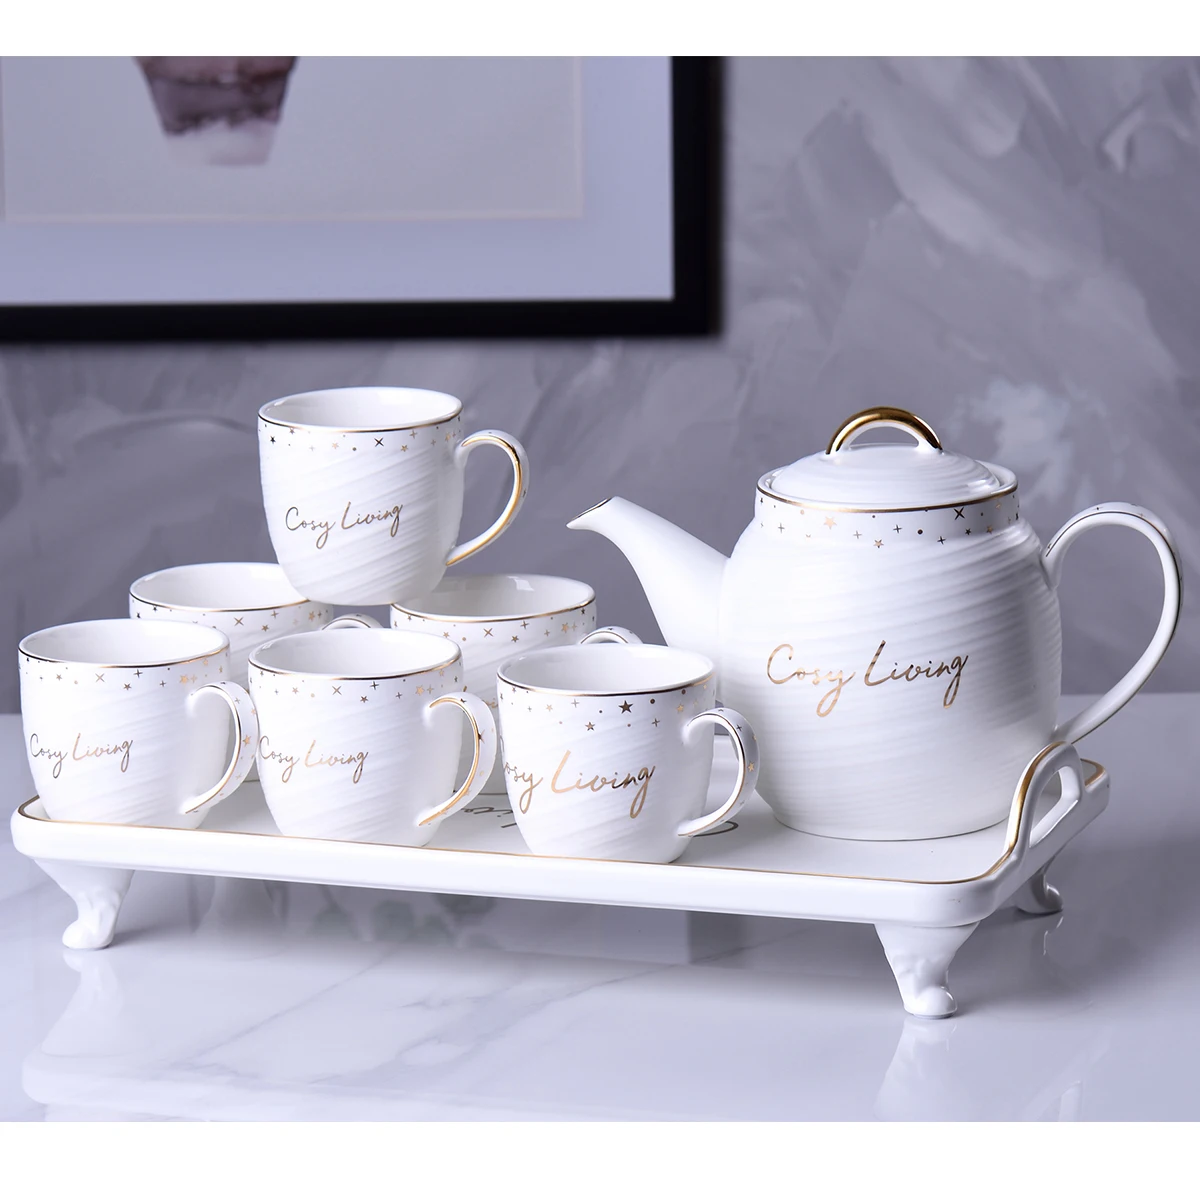 Nordic Minimalist Style Afternoon Tea Cup Sets 8 Pcs Ceramic Coffee Tea Sets With Gold Decor 9746